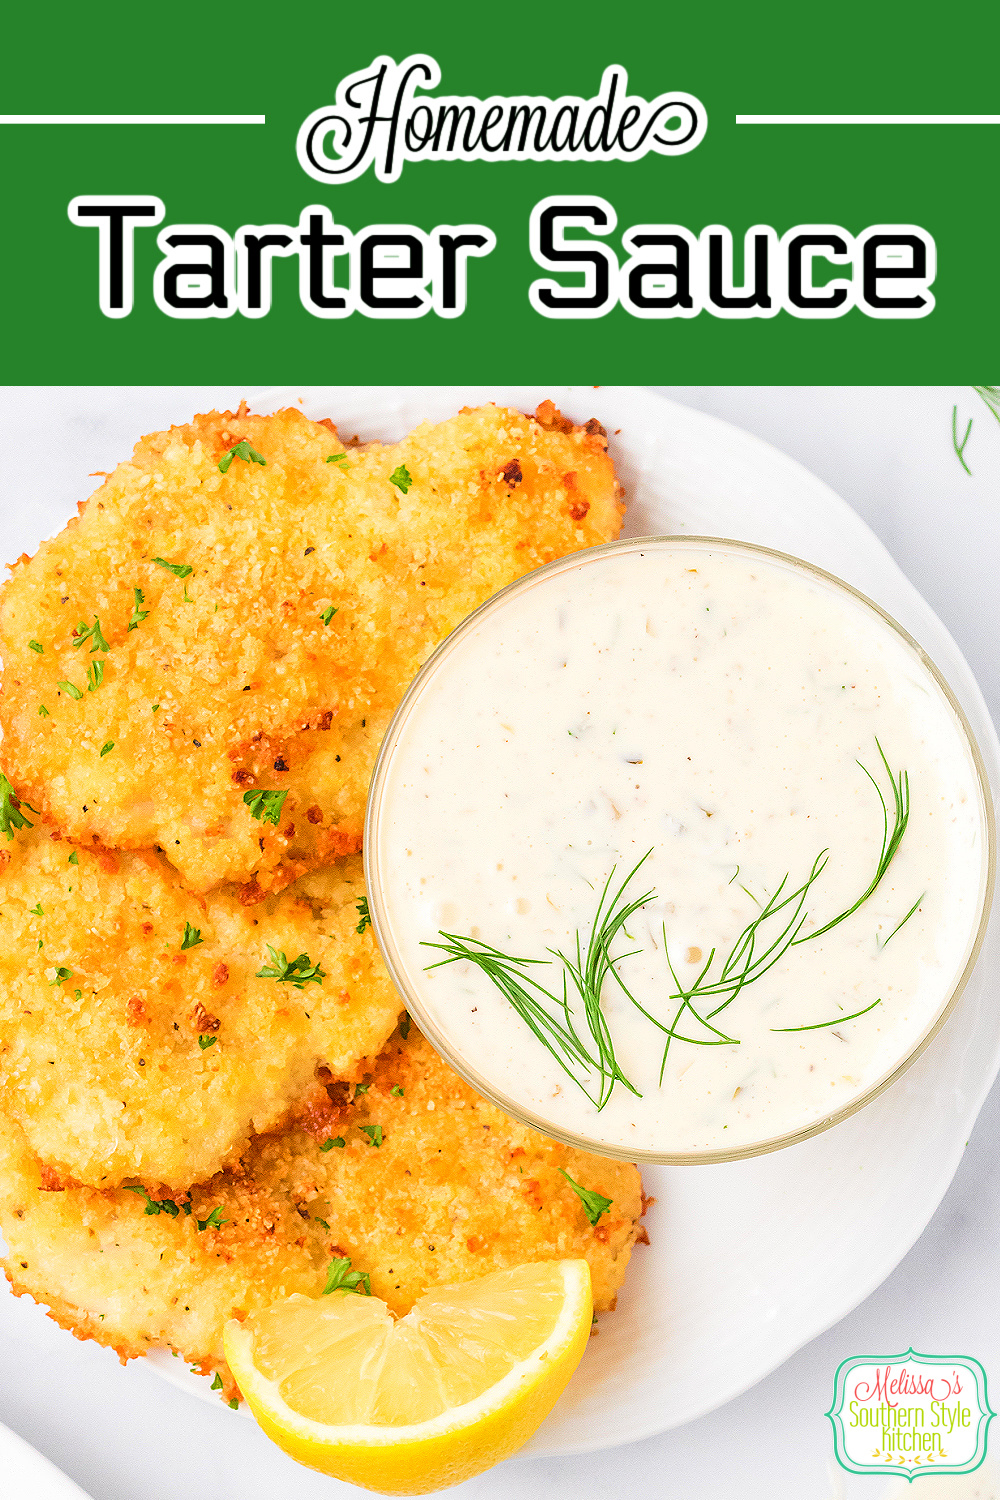 Enjoy this easy Homemade Tartar Sauce Recipe alongside any of your favorite seafood dishes #tartersauce #easytartersaucerecipe #howtomaketartersauce #seafoodsauce #seafoodrecipes #sauces